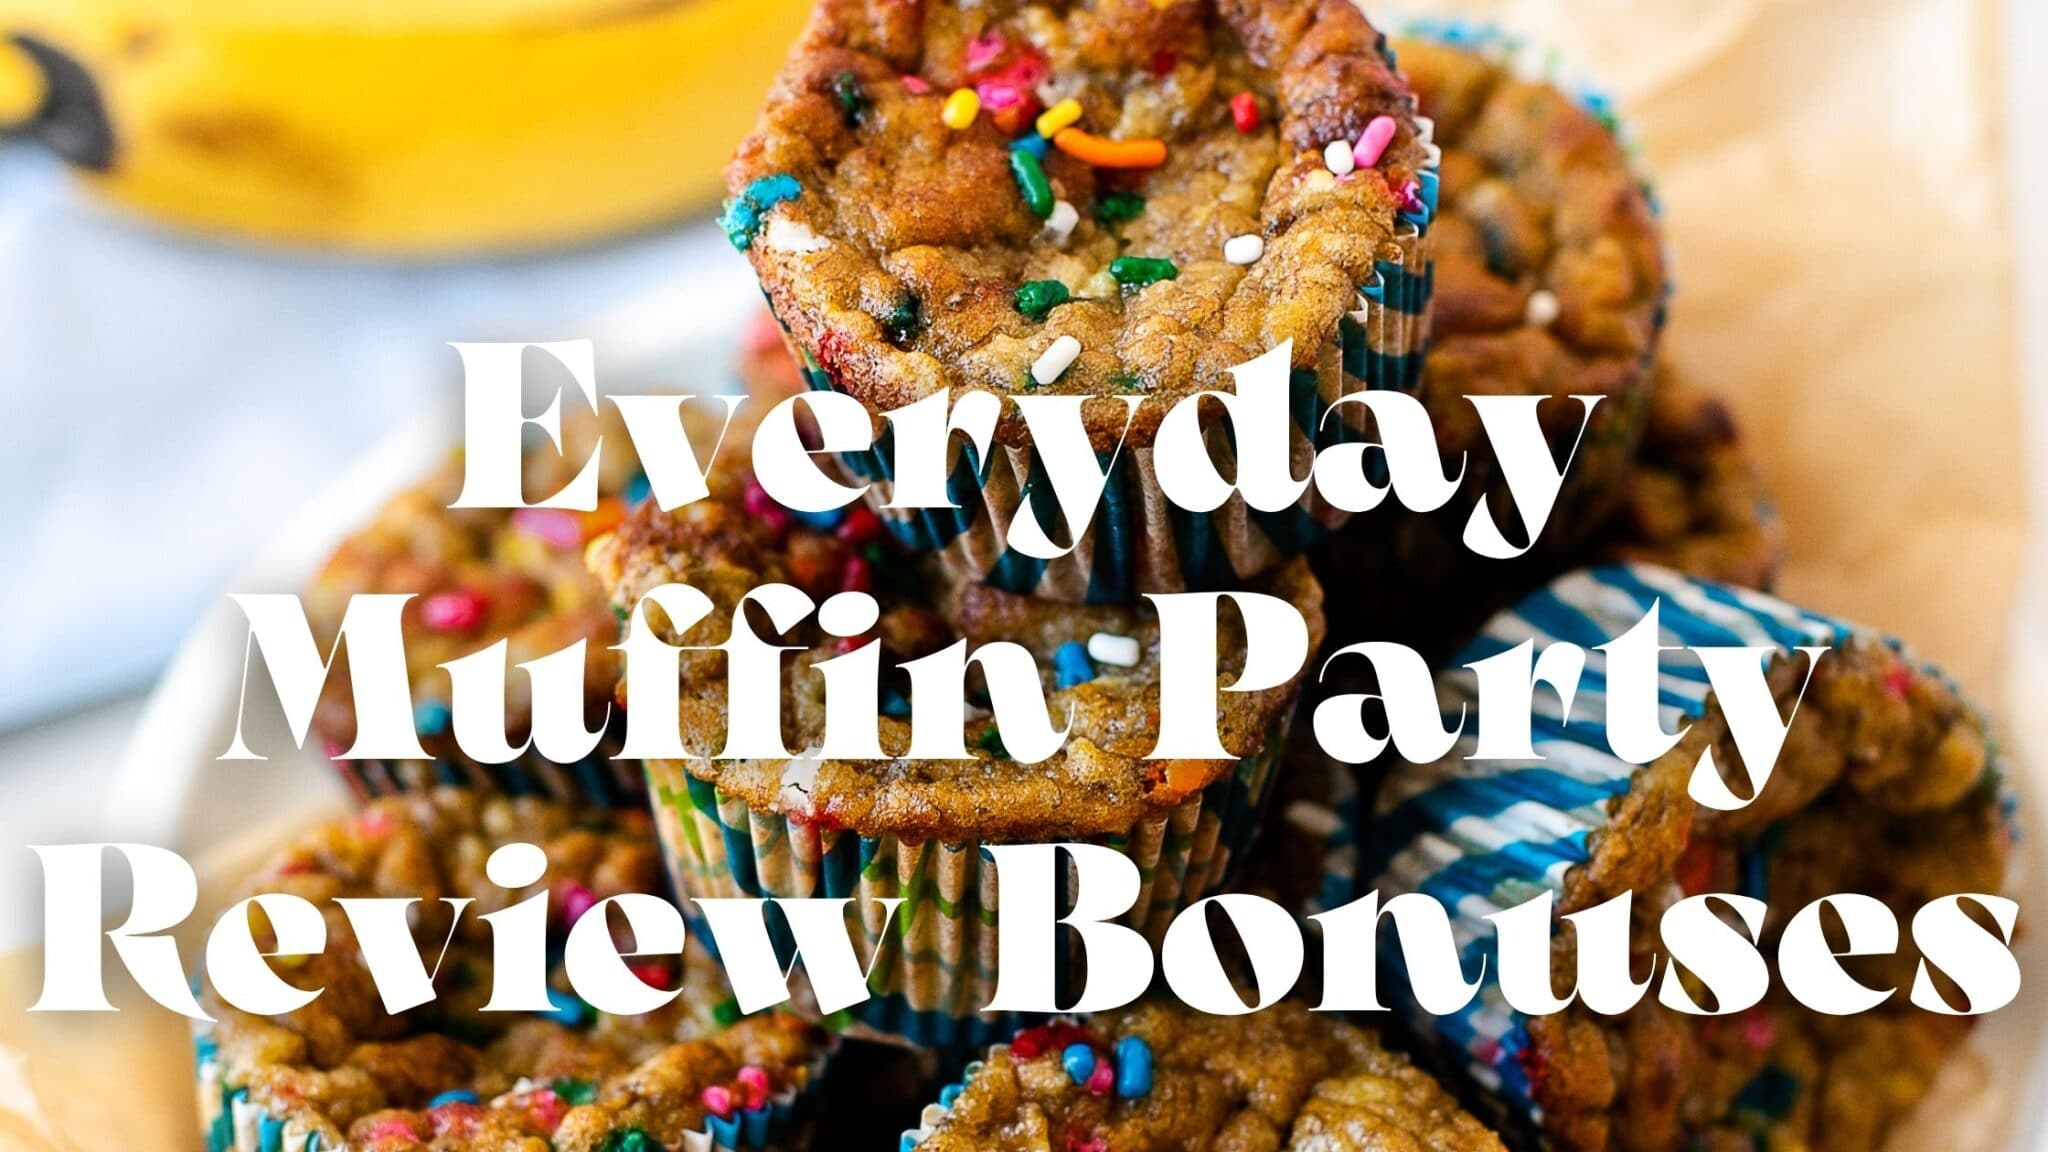 Everyday Muffin Party Review Bonuses